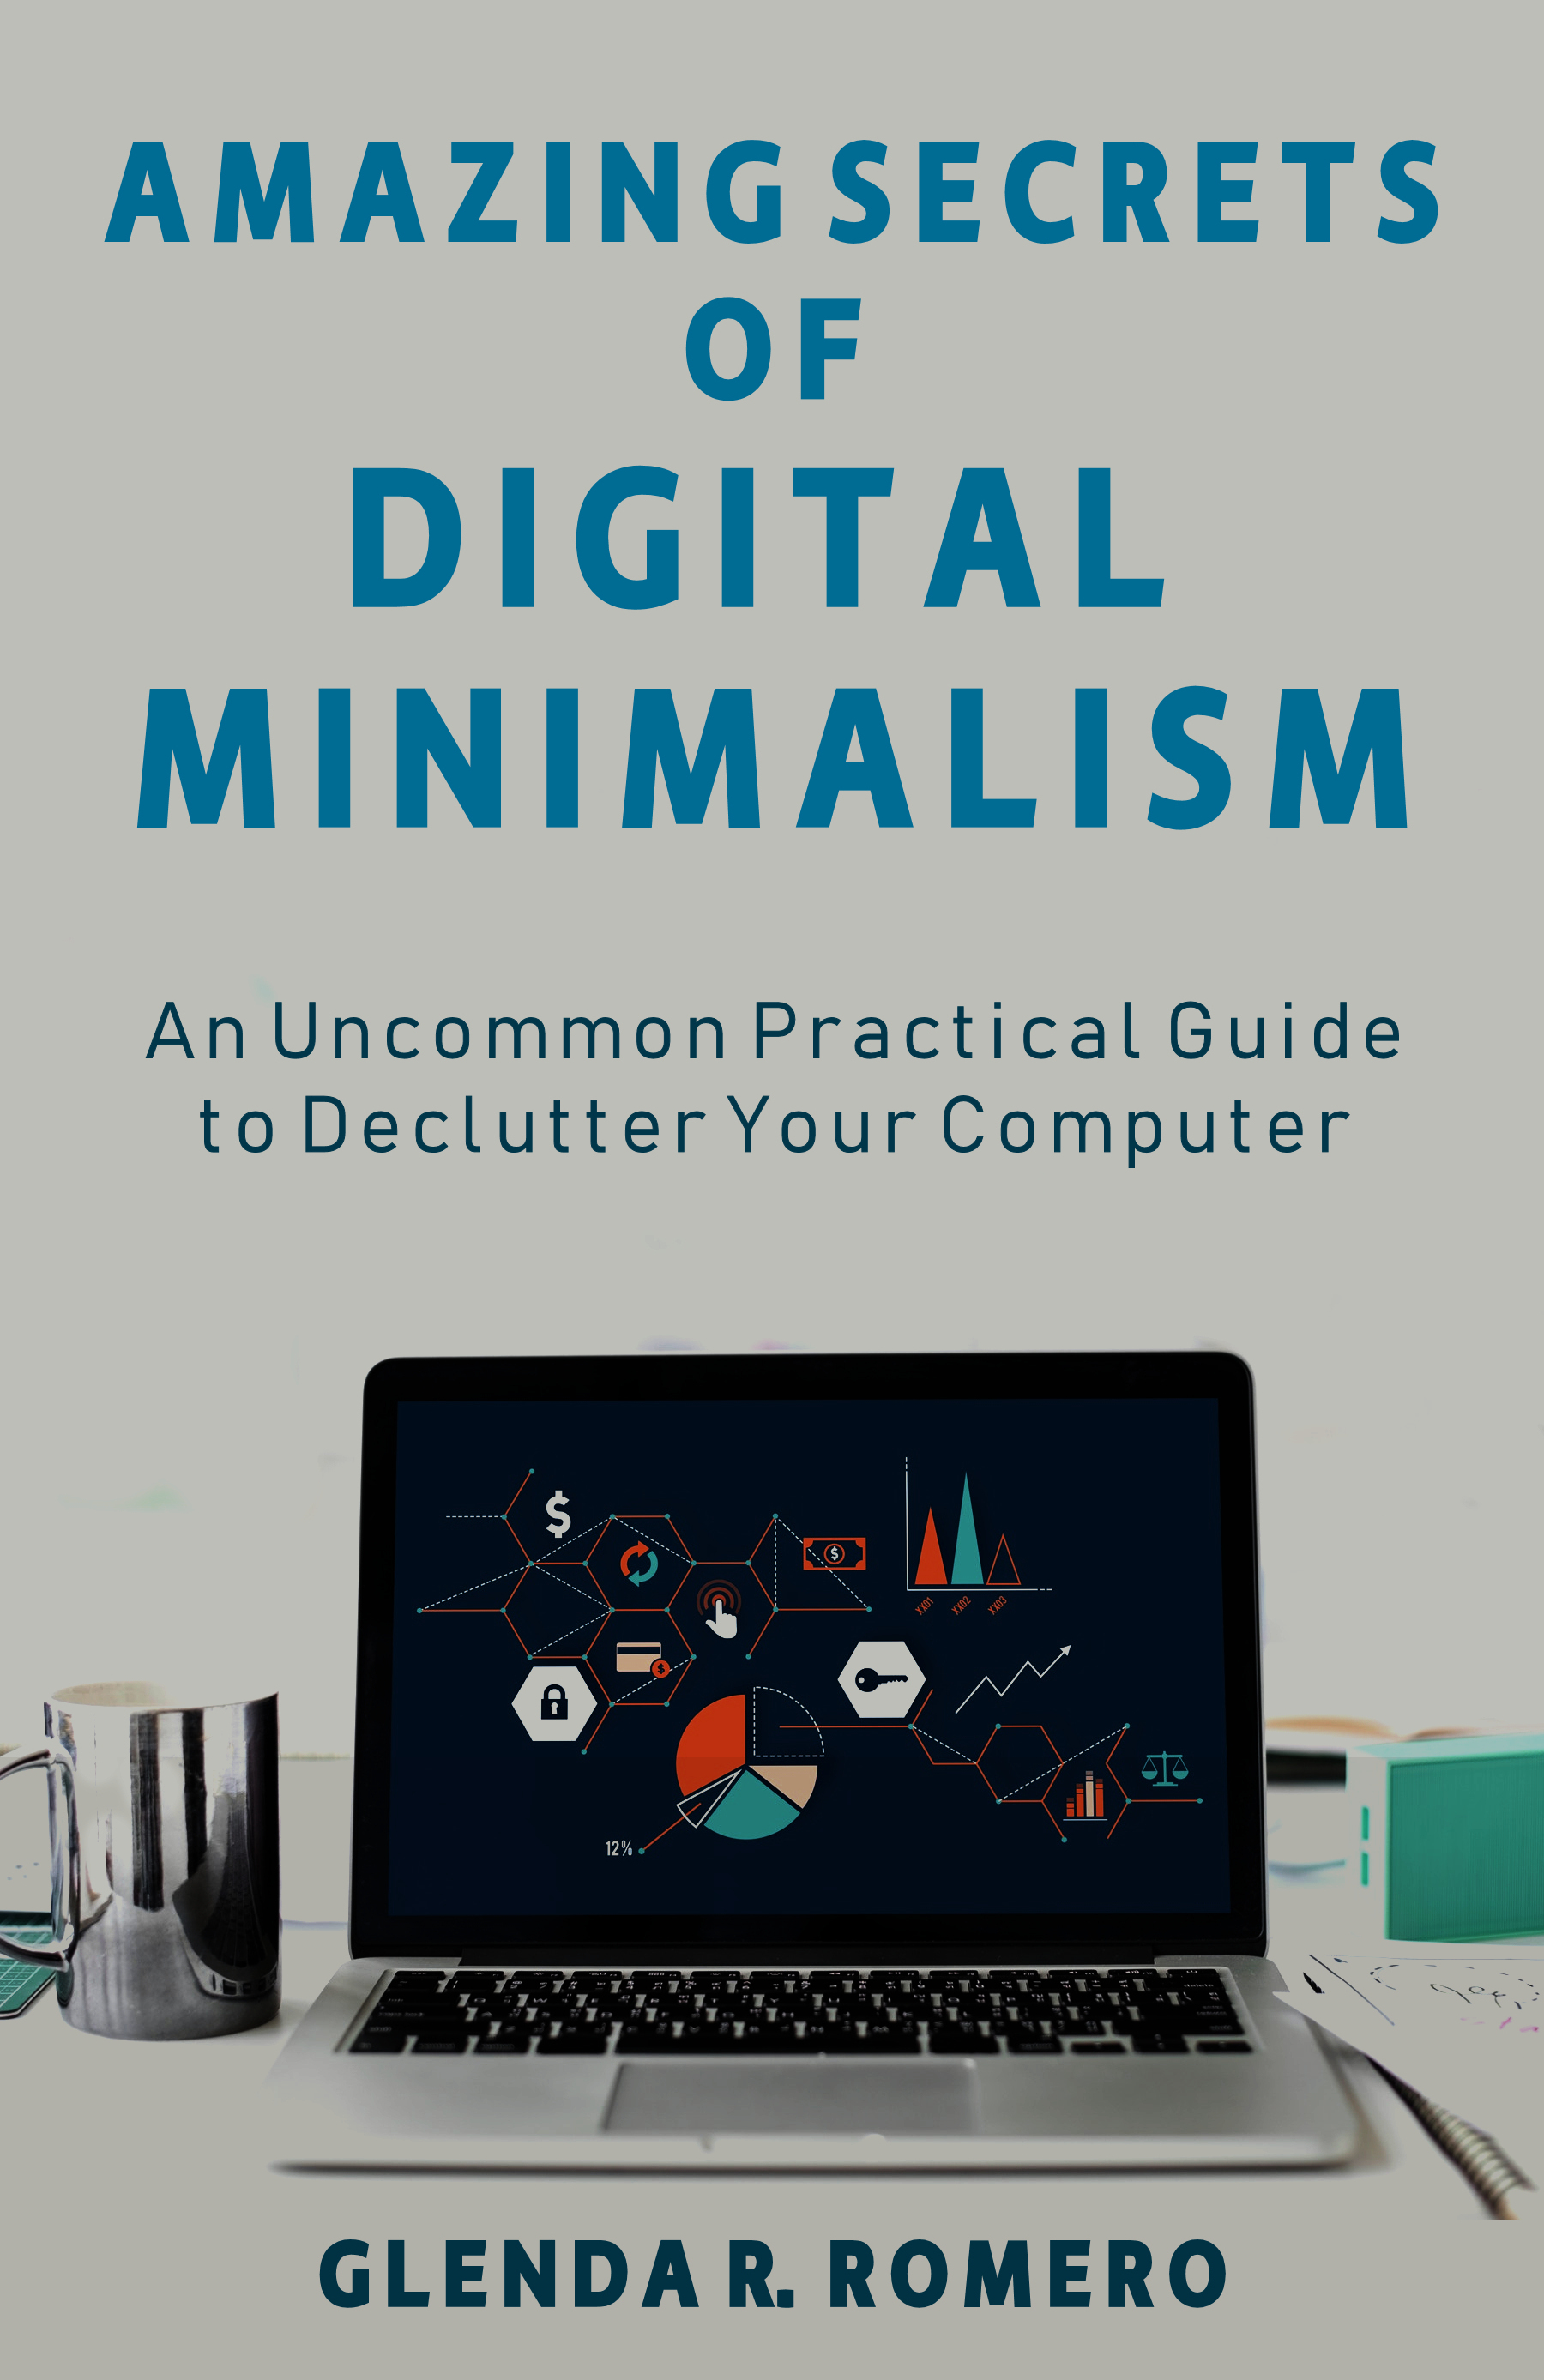 FREE: Amazing Secrets of Digital Minimalism: An Uncommon Guide to Declutter Your Computer by Glenda R. Romero